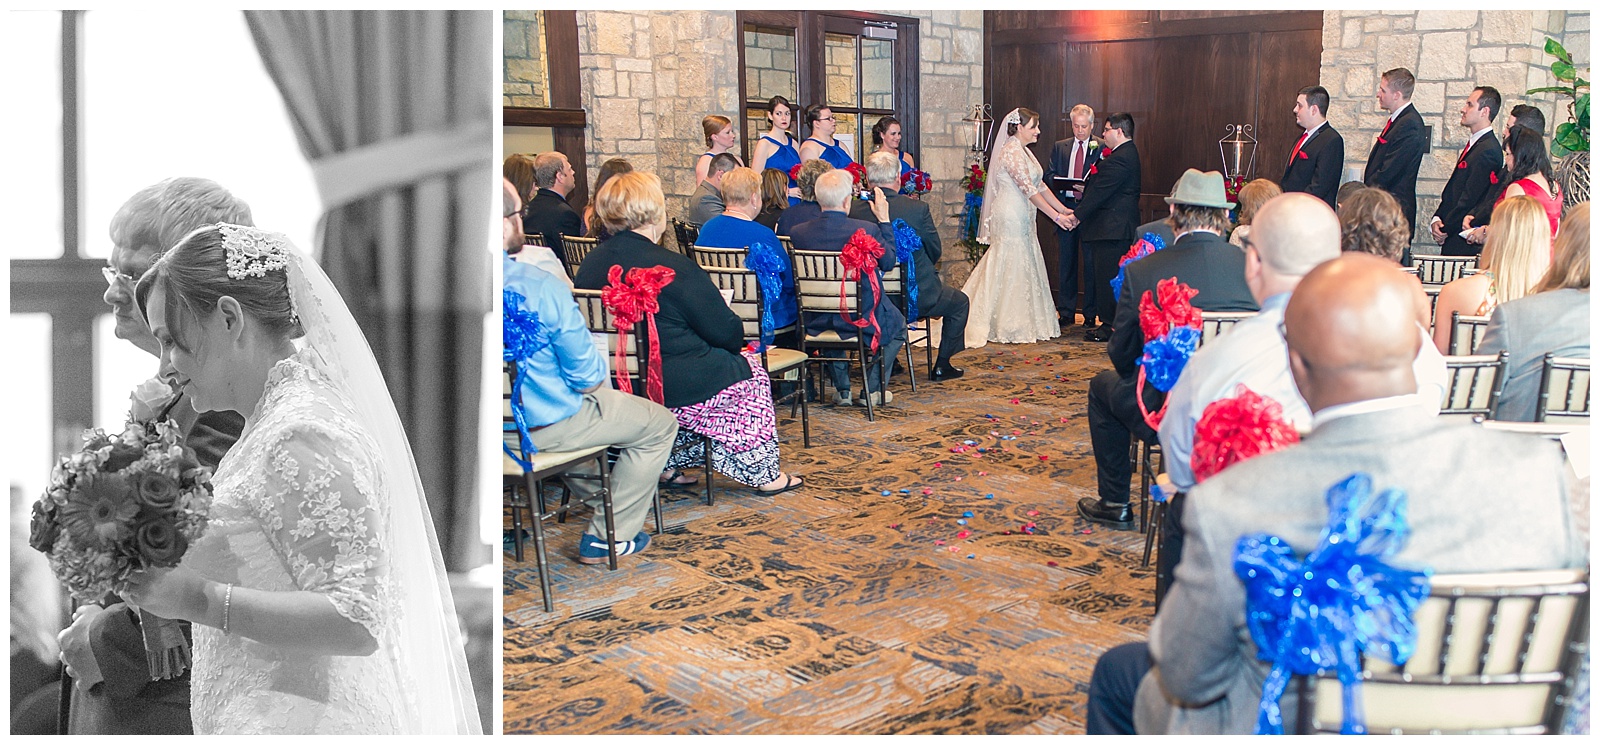 Wedding photography at The Oread in Lawrence, Kansas.